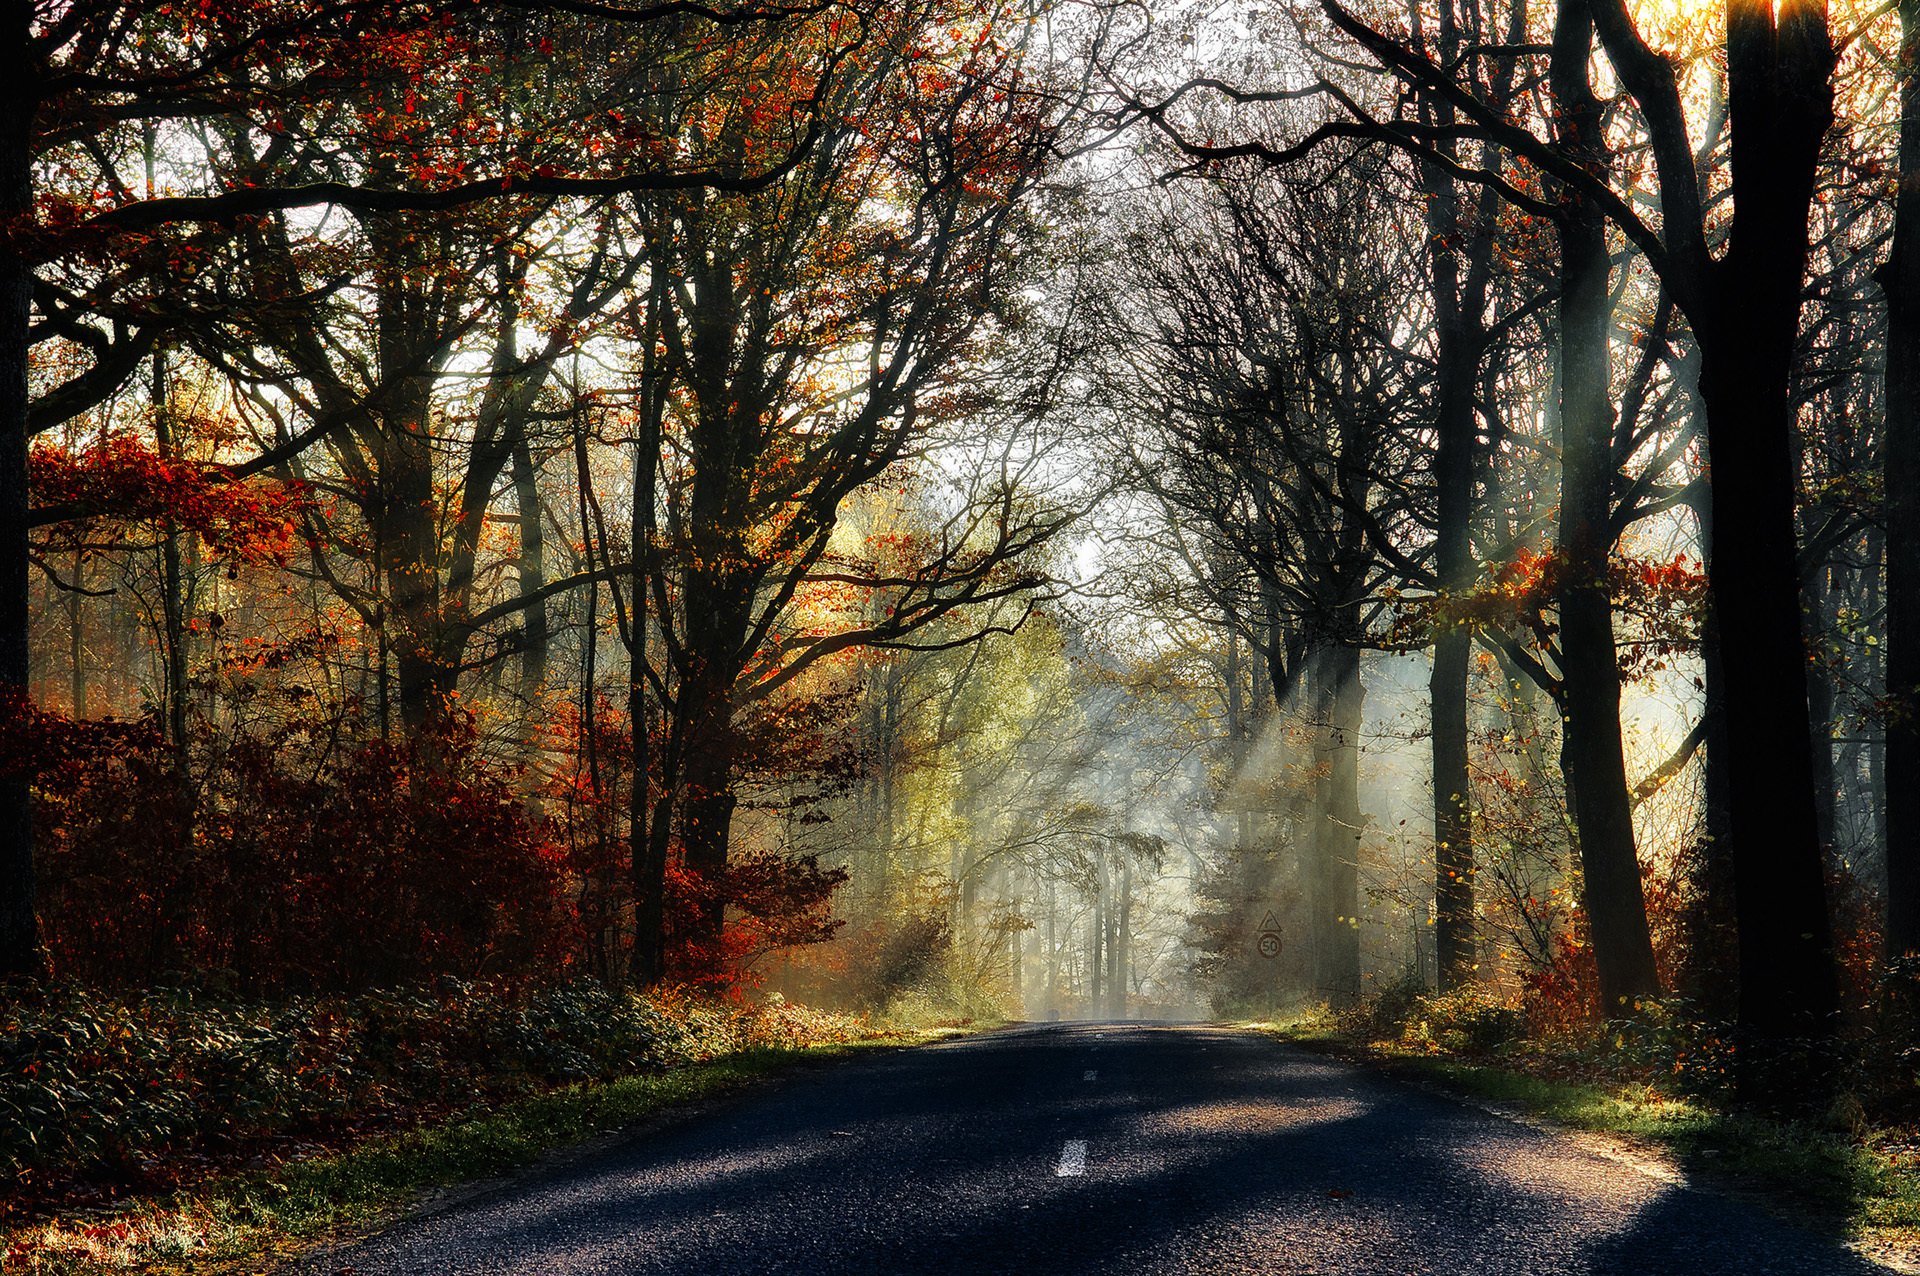 leaves, Park, Rays, Forest, Nature, Fall, Trees, Sunrays, Path, Walk, Colors, Splendor, Road, Colorful, Autumn Wallpaper